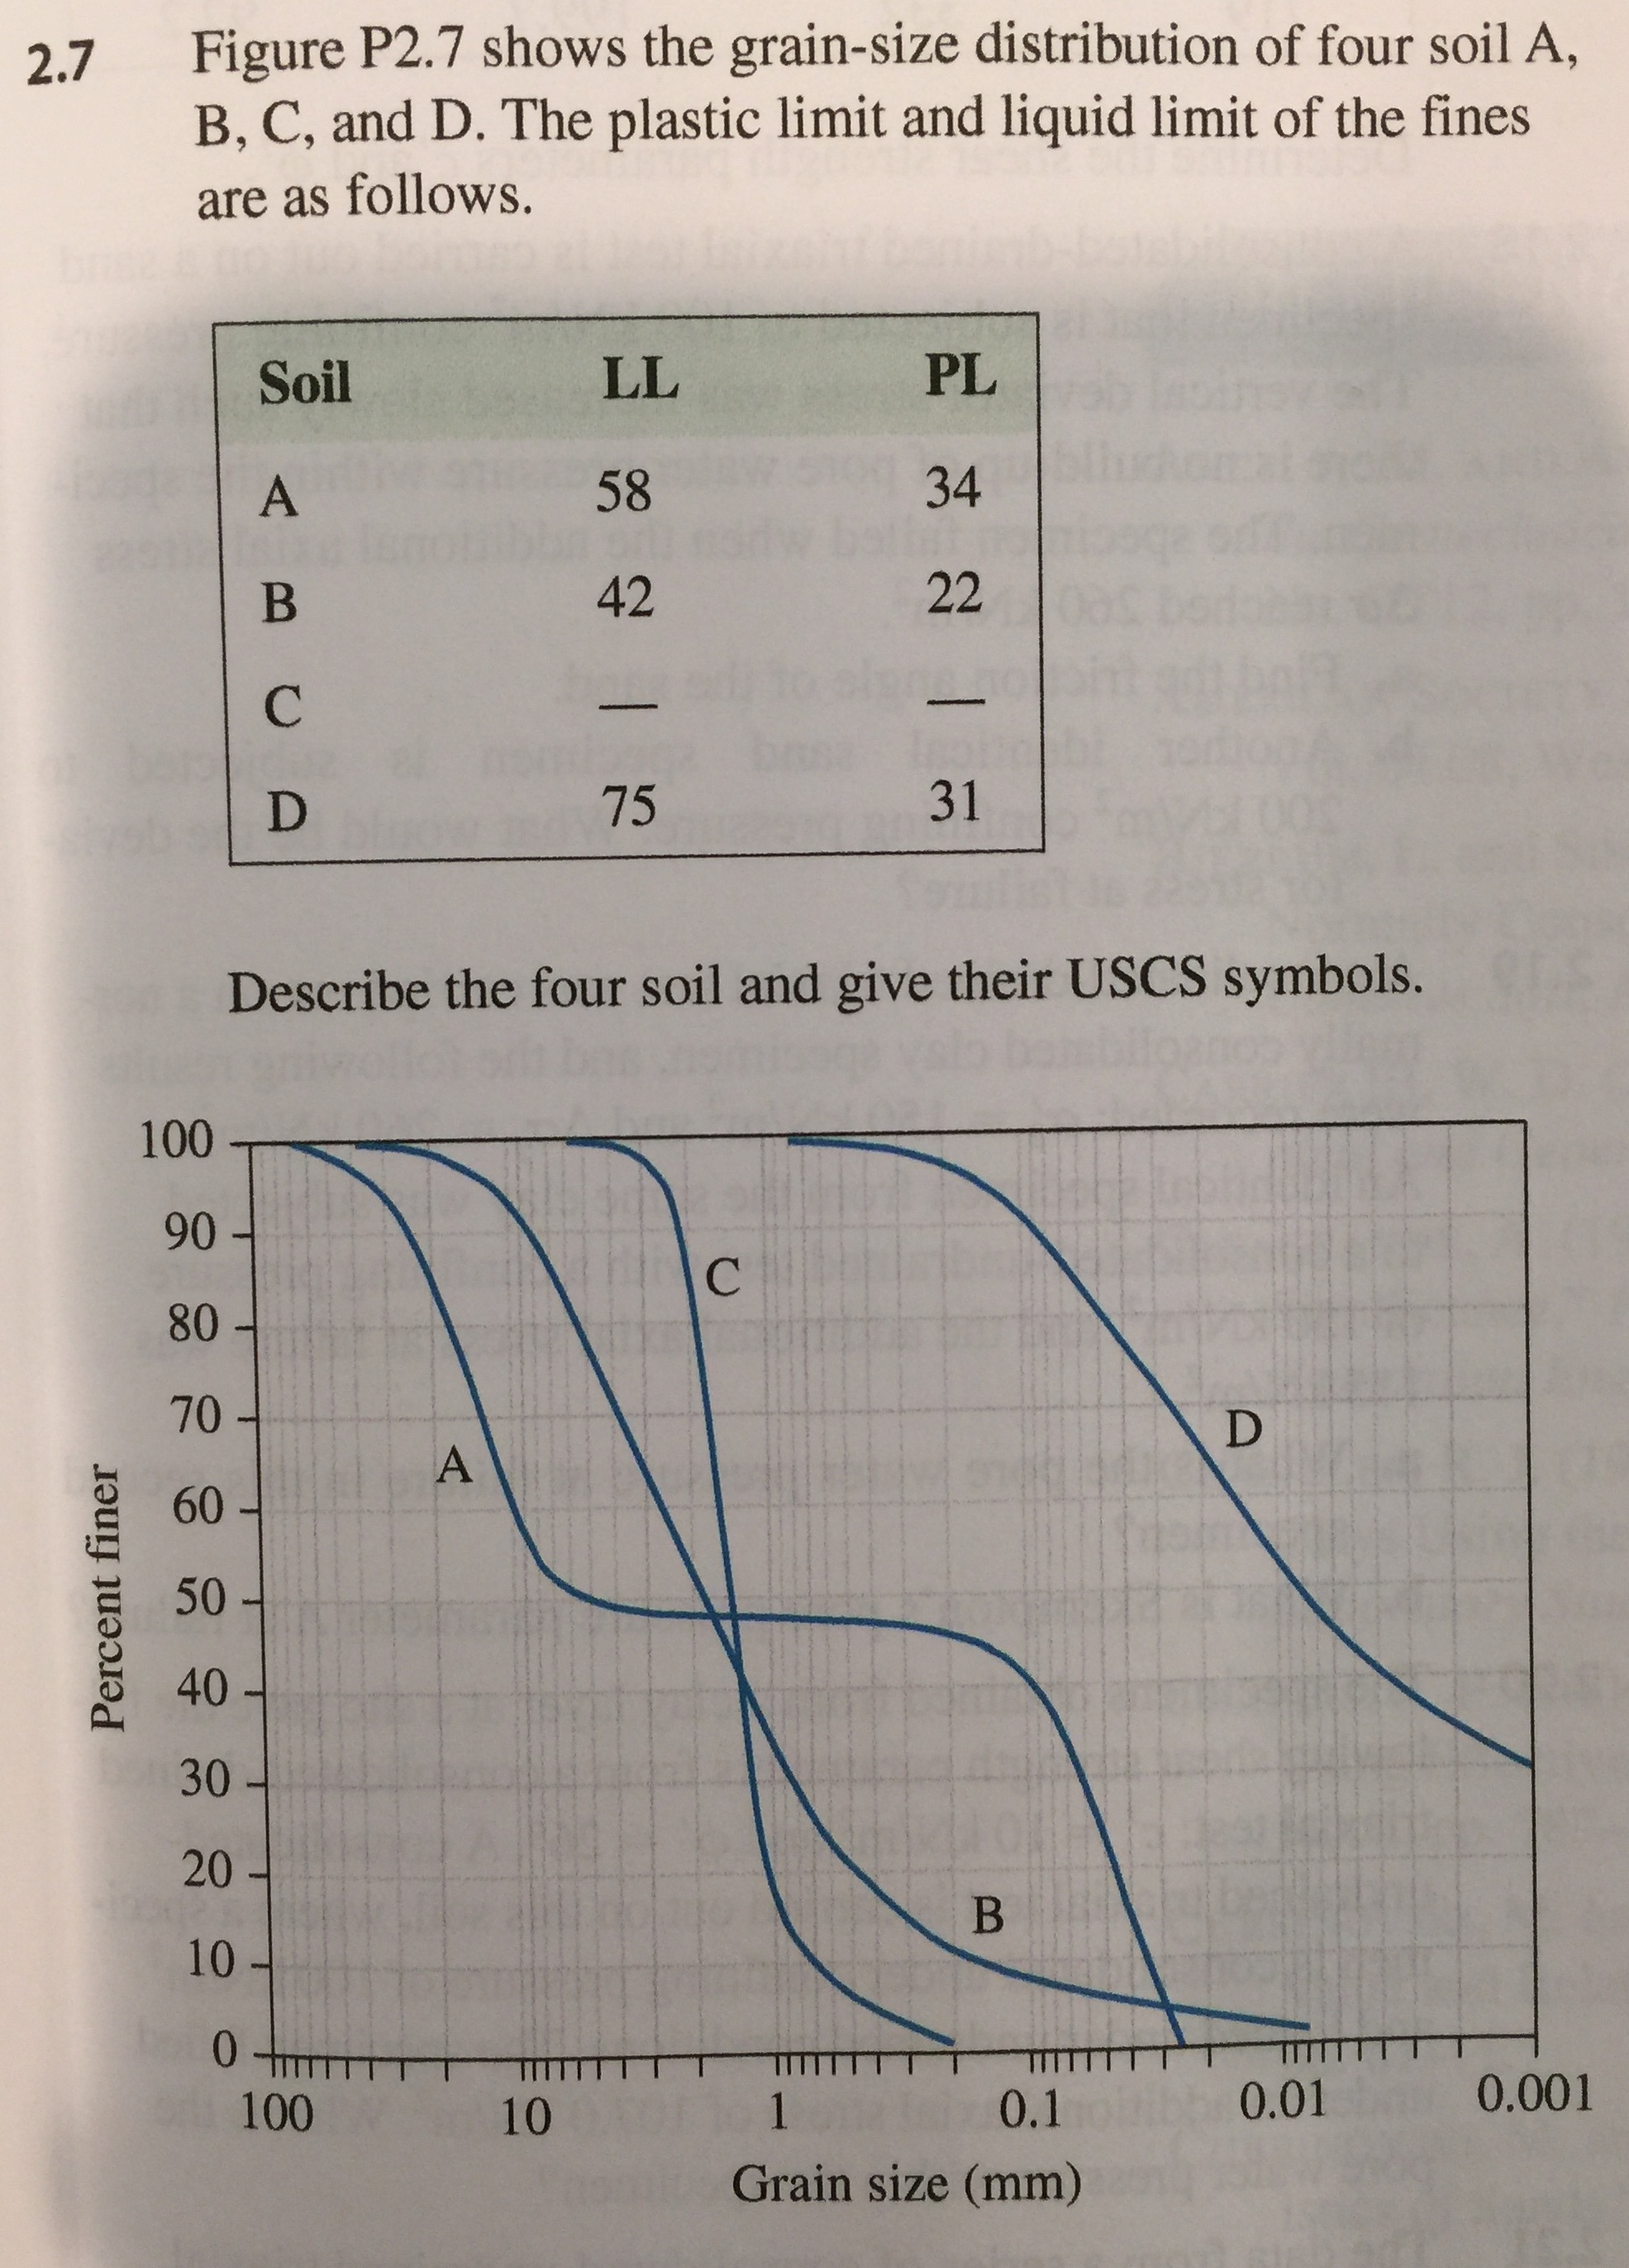 2.7 Figure P2.7 shows the grain-size distribution of four soil A,
B, C, and D. The plastic limit and liquid limit of the fines
are as follows.
Soil
PL
01
58
34
42
75
31
Describe the four soil and give their USCS symbols.
100
90
80
70 -
60
50
o 40
30
20
10
0.01
0.001
100
10
0.1
Grain size (mm)
